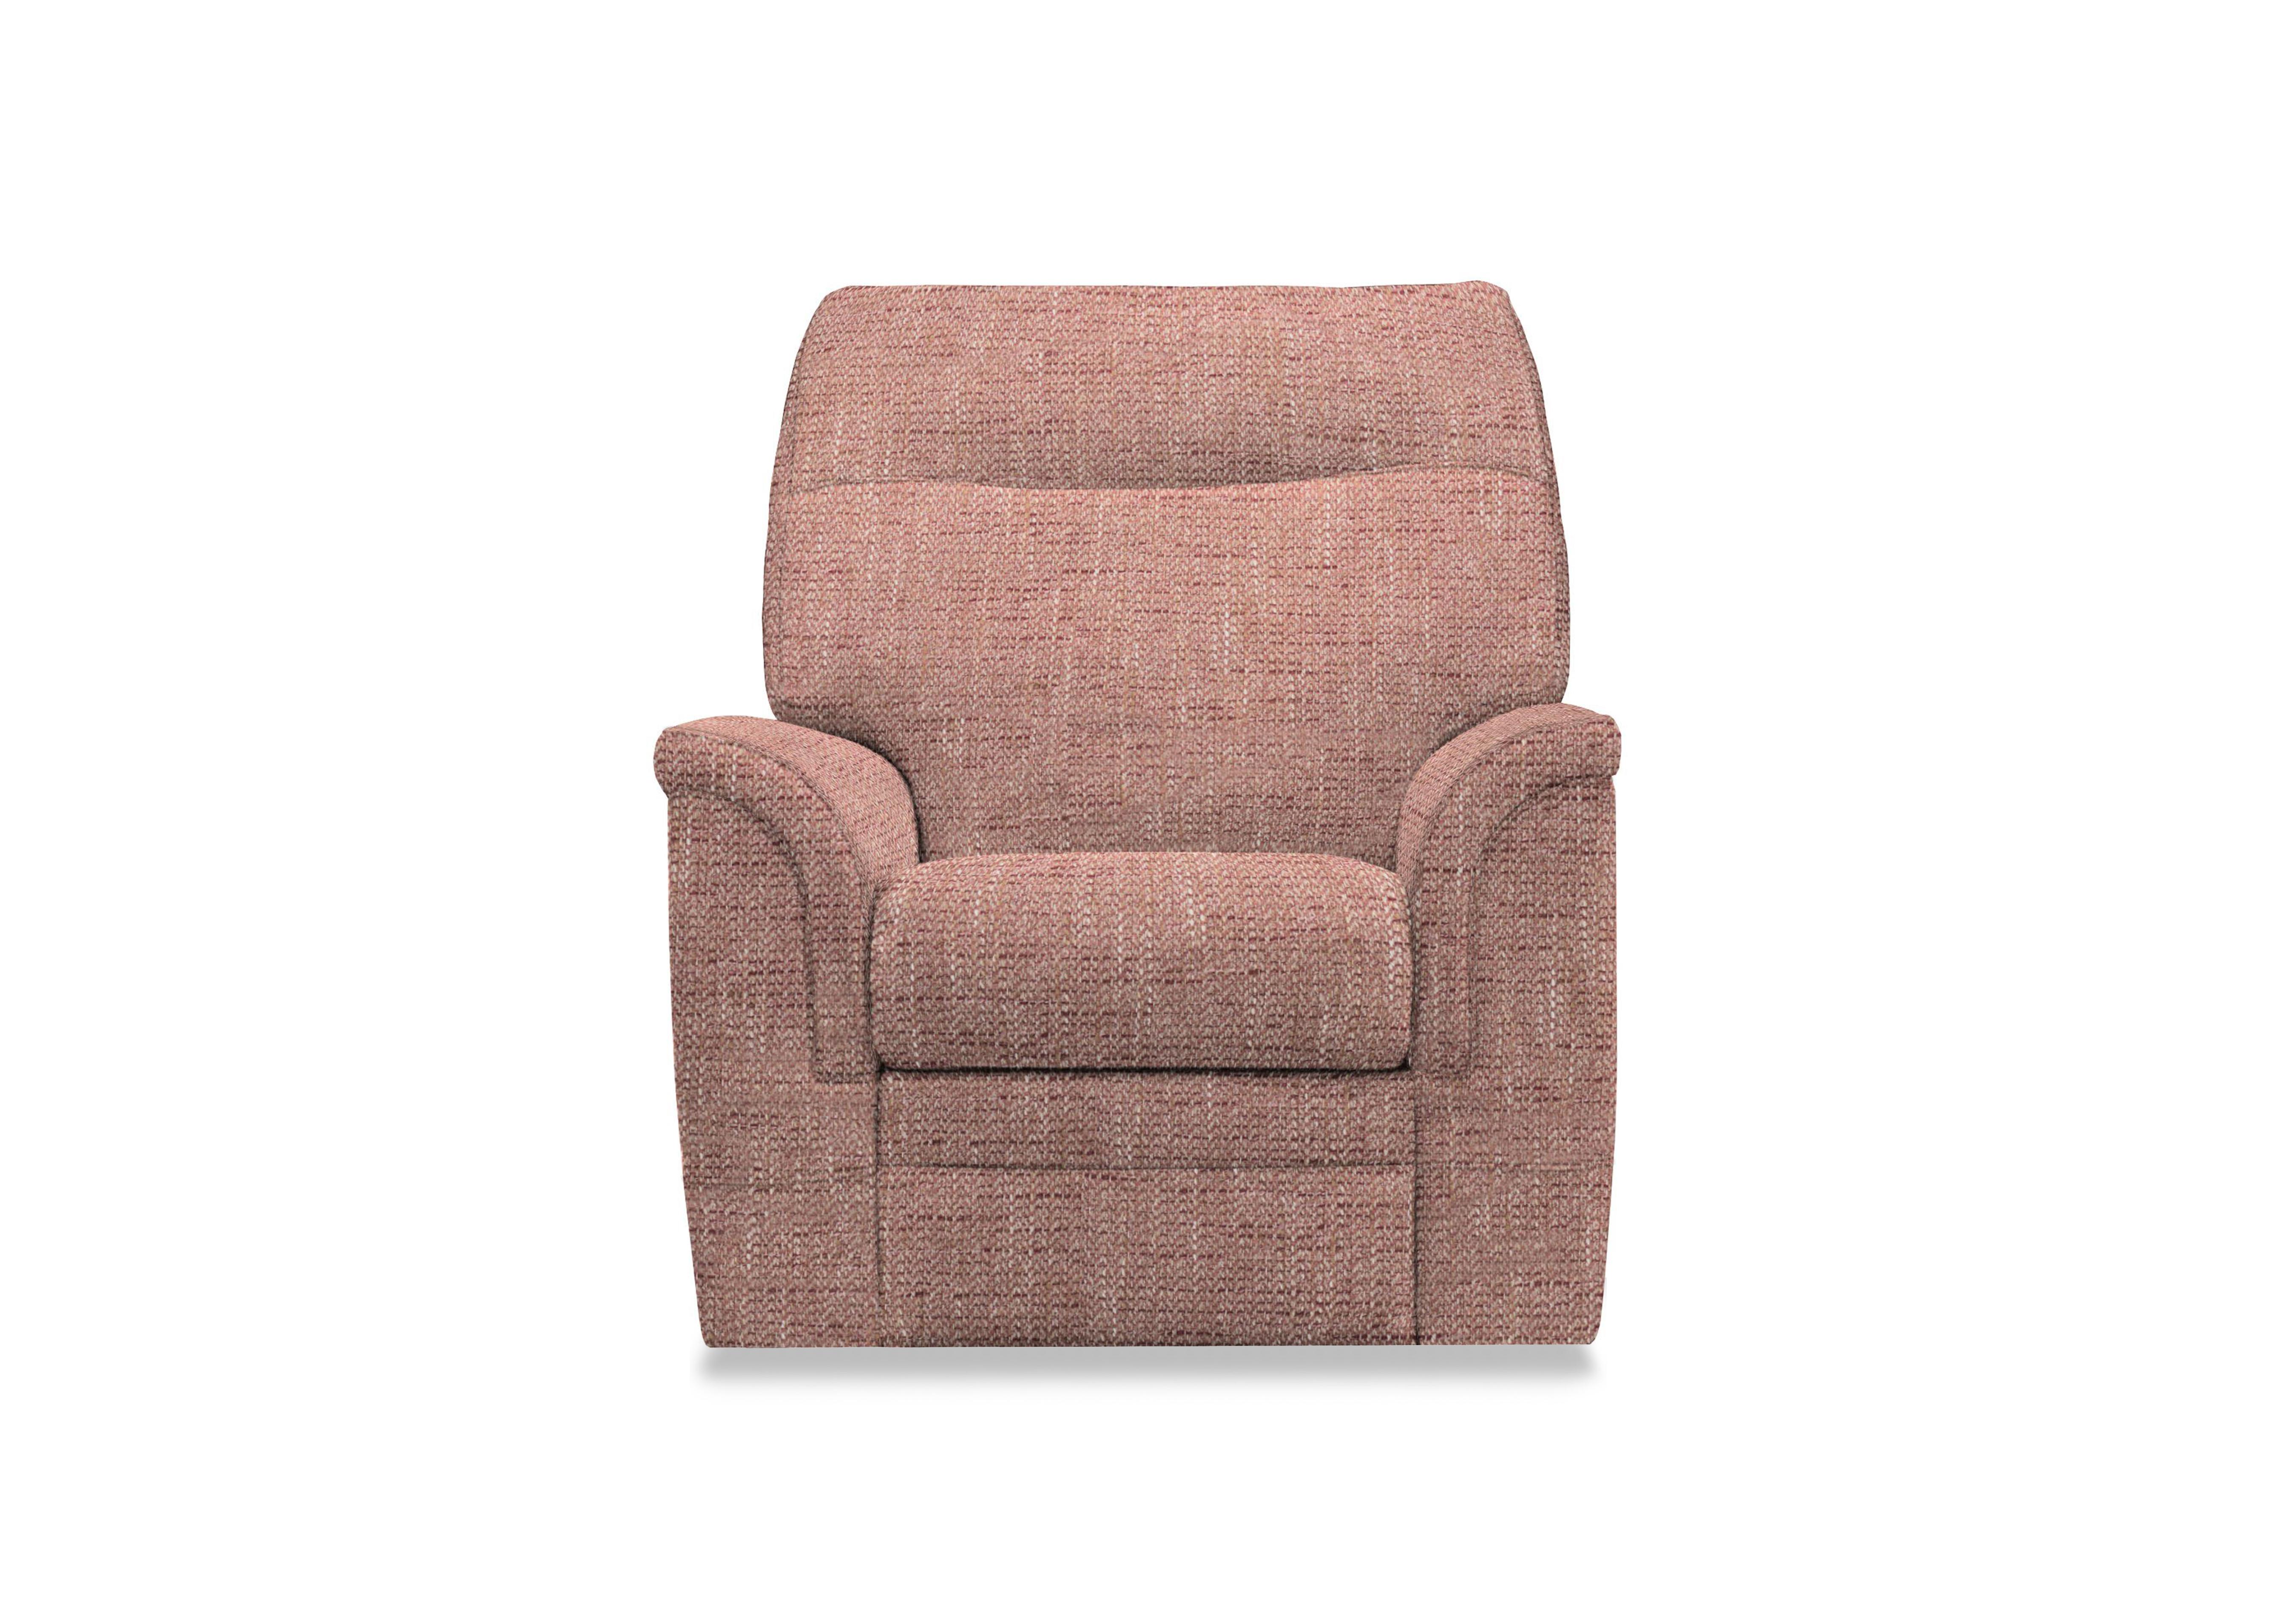 Hudson 23 Fabric Power Recliner Chair with Power Headrest and Power Lumbar in Country Rose 001409-0003 on Furniture Village